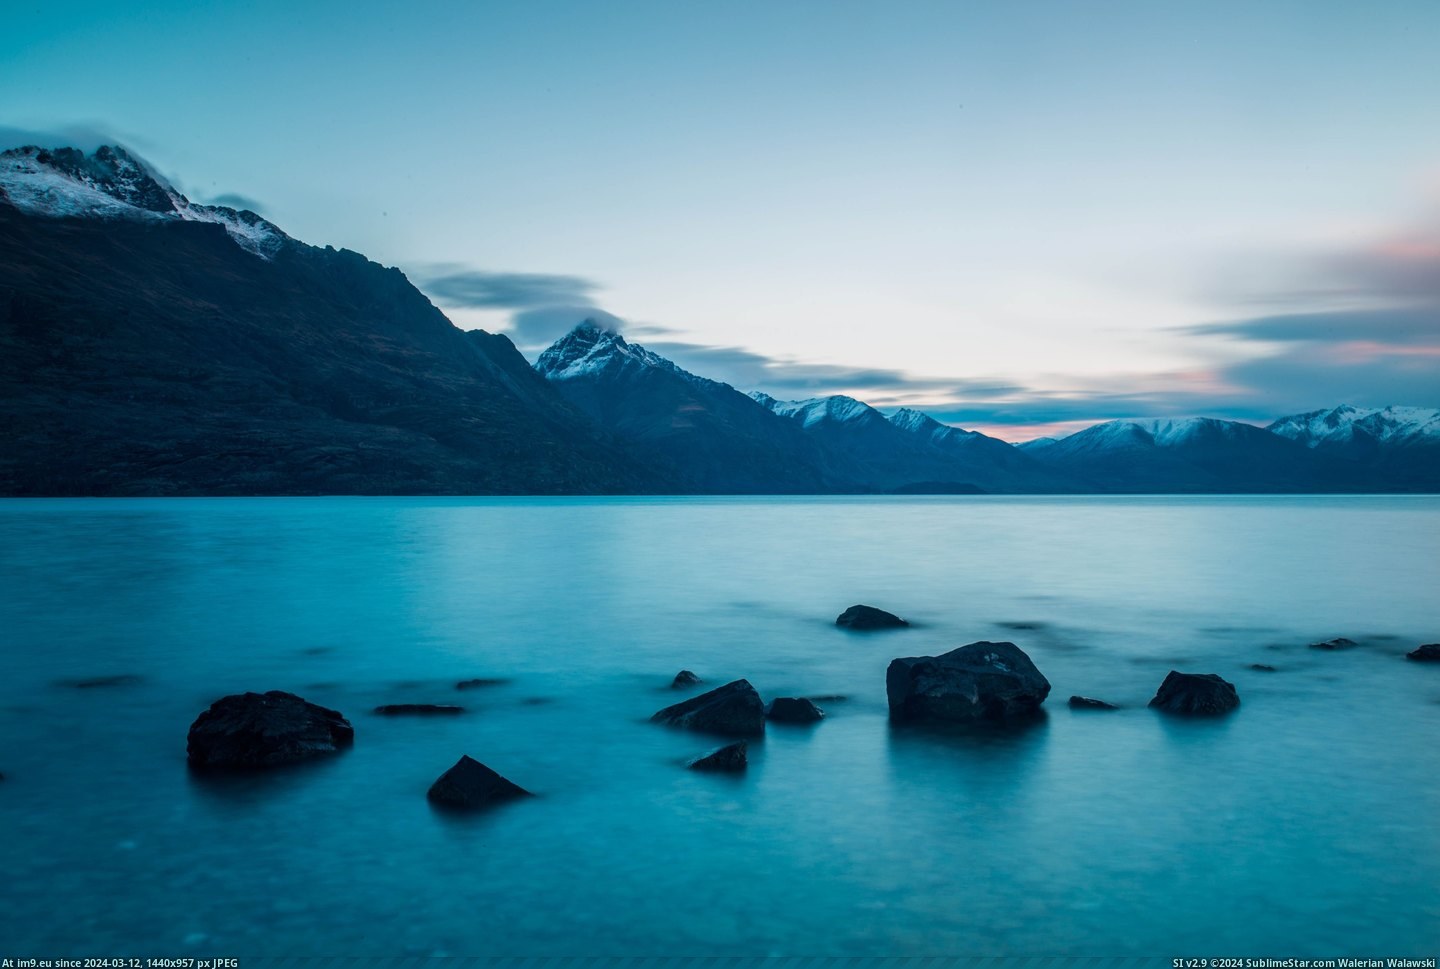 #Day #Hotel #Weeks #Minutes #Place #Zealand [Earthporn] I went to New Zealand for 2 weeks and found this place 5 minutes from my hotel on my last day there [5440x3627][OC] Pic. (Bild von album My r/EARTHPORN favs))